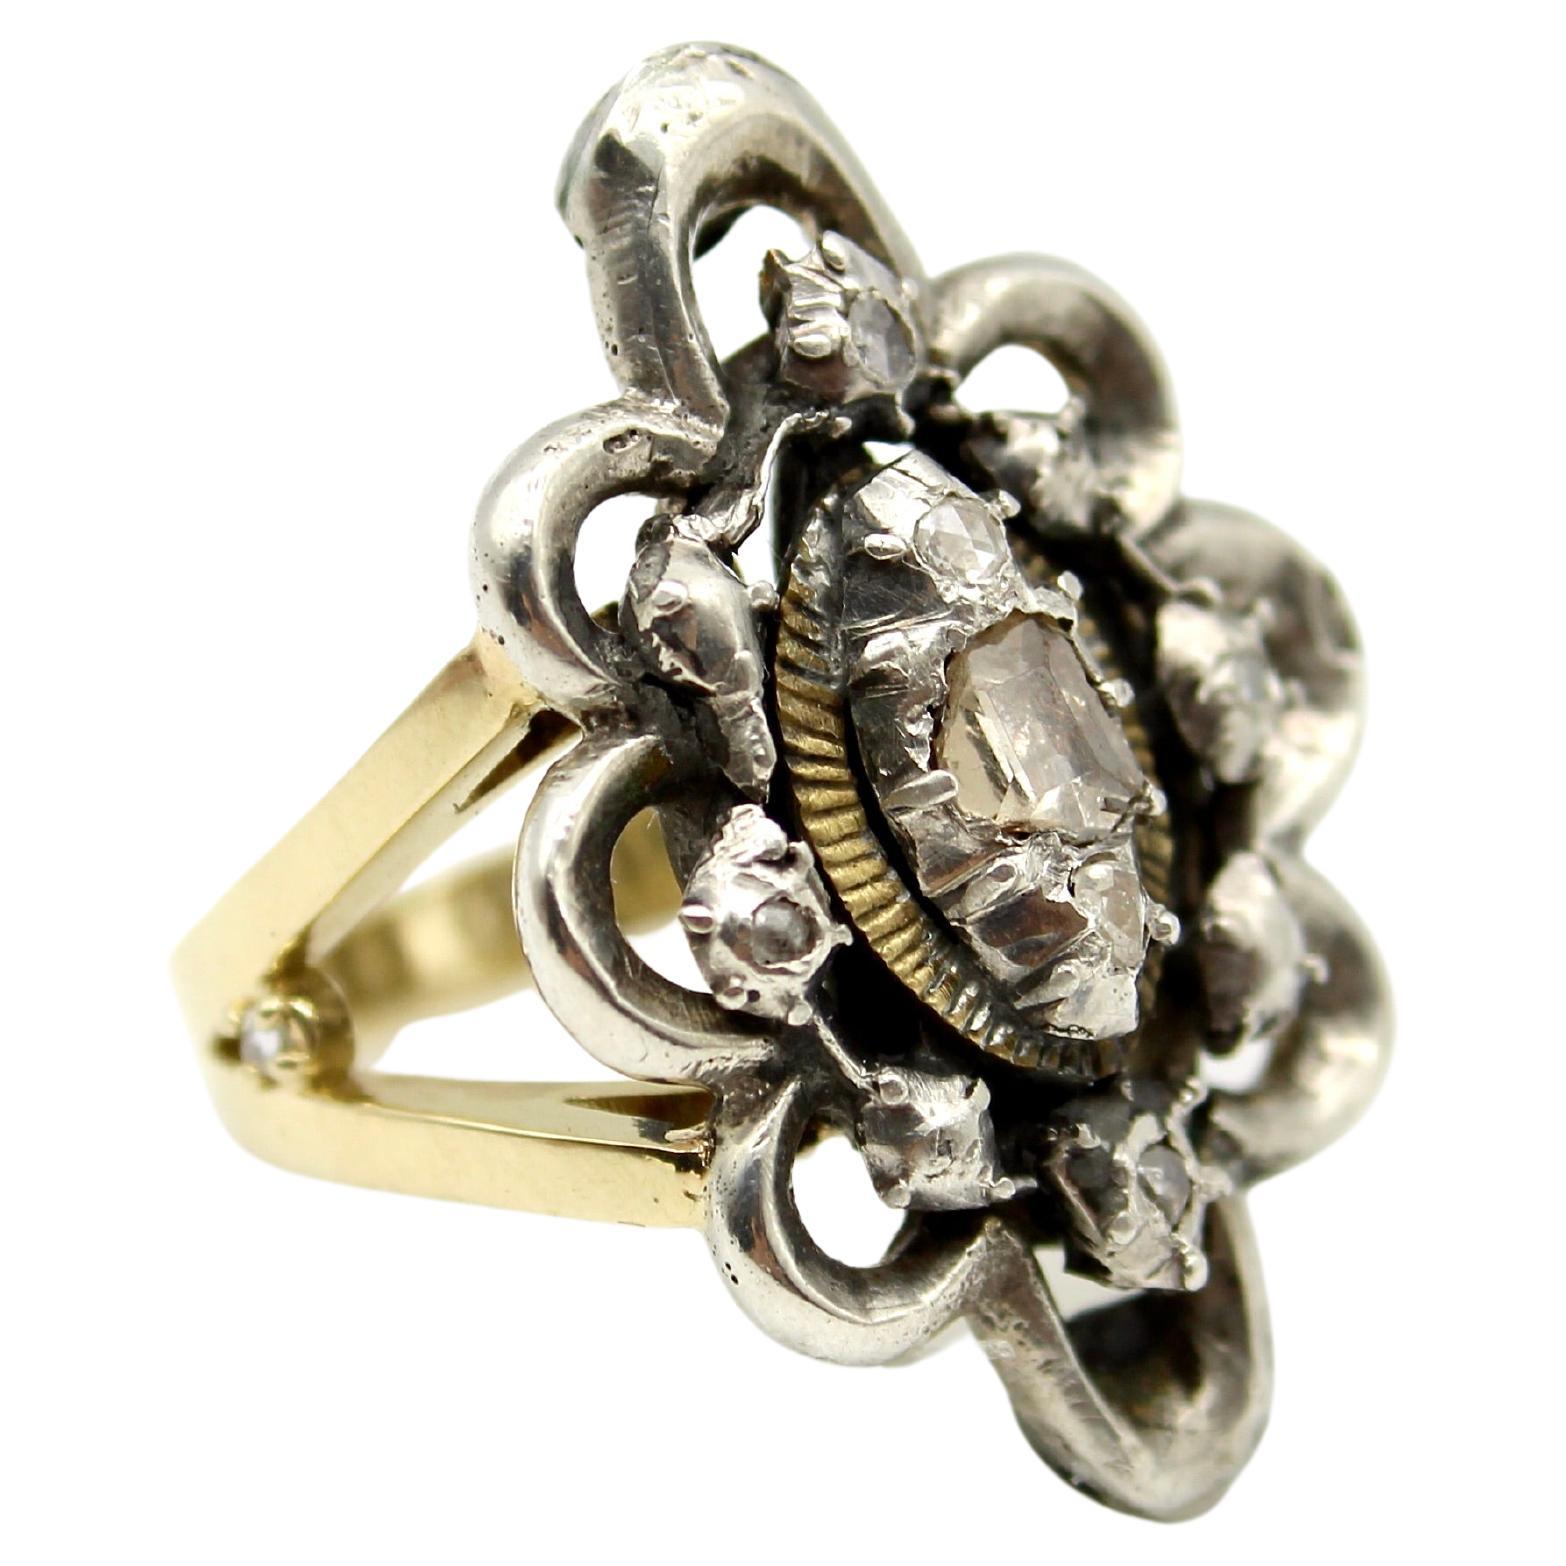 Georgian Revival 14K and Sterling Silver Ring with Diamonds